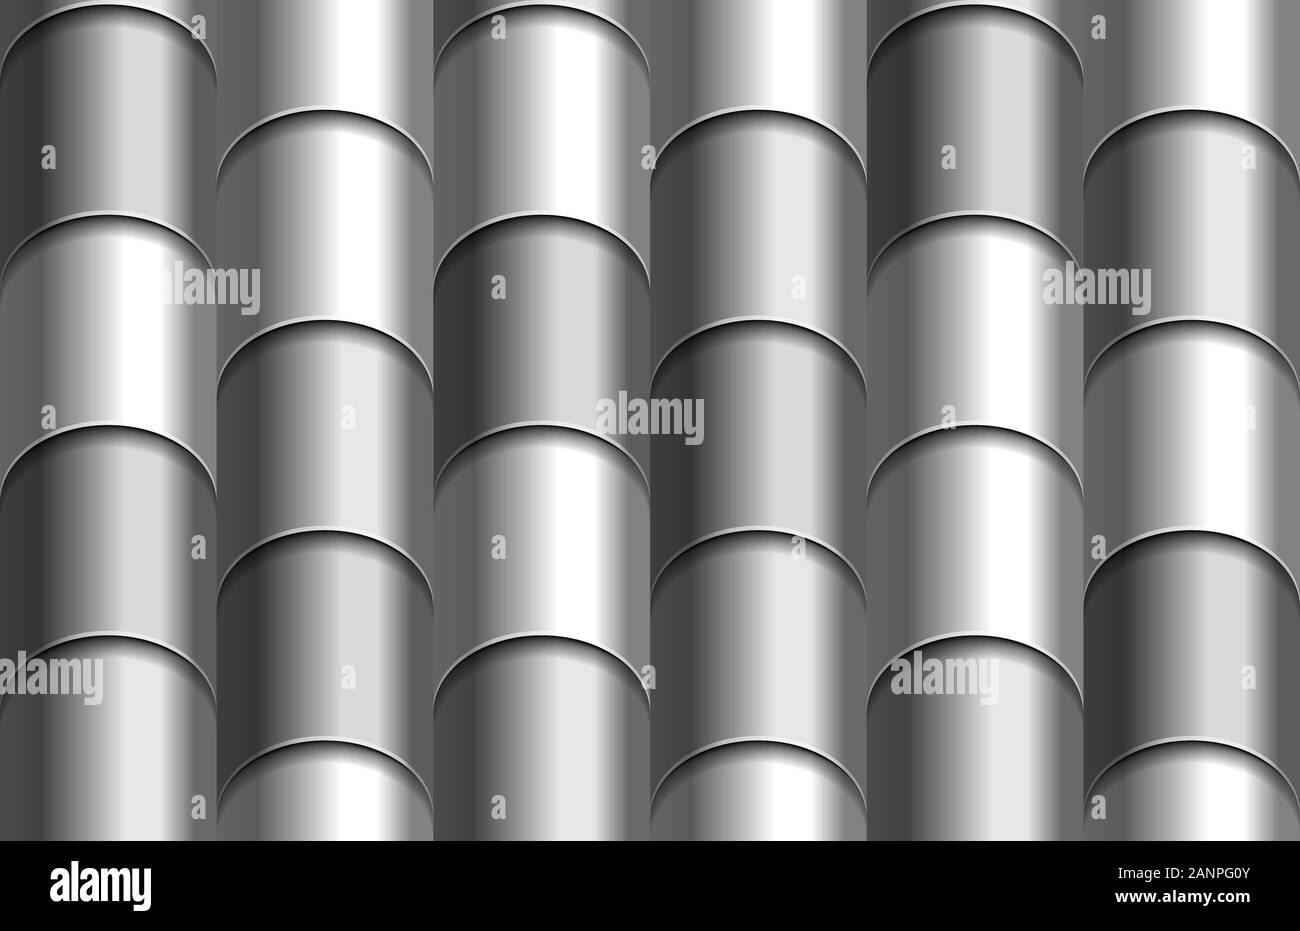 Exterior Architecture Roofing Detail Black And White Stock Photos